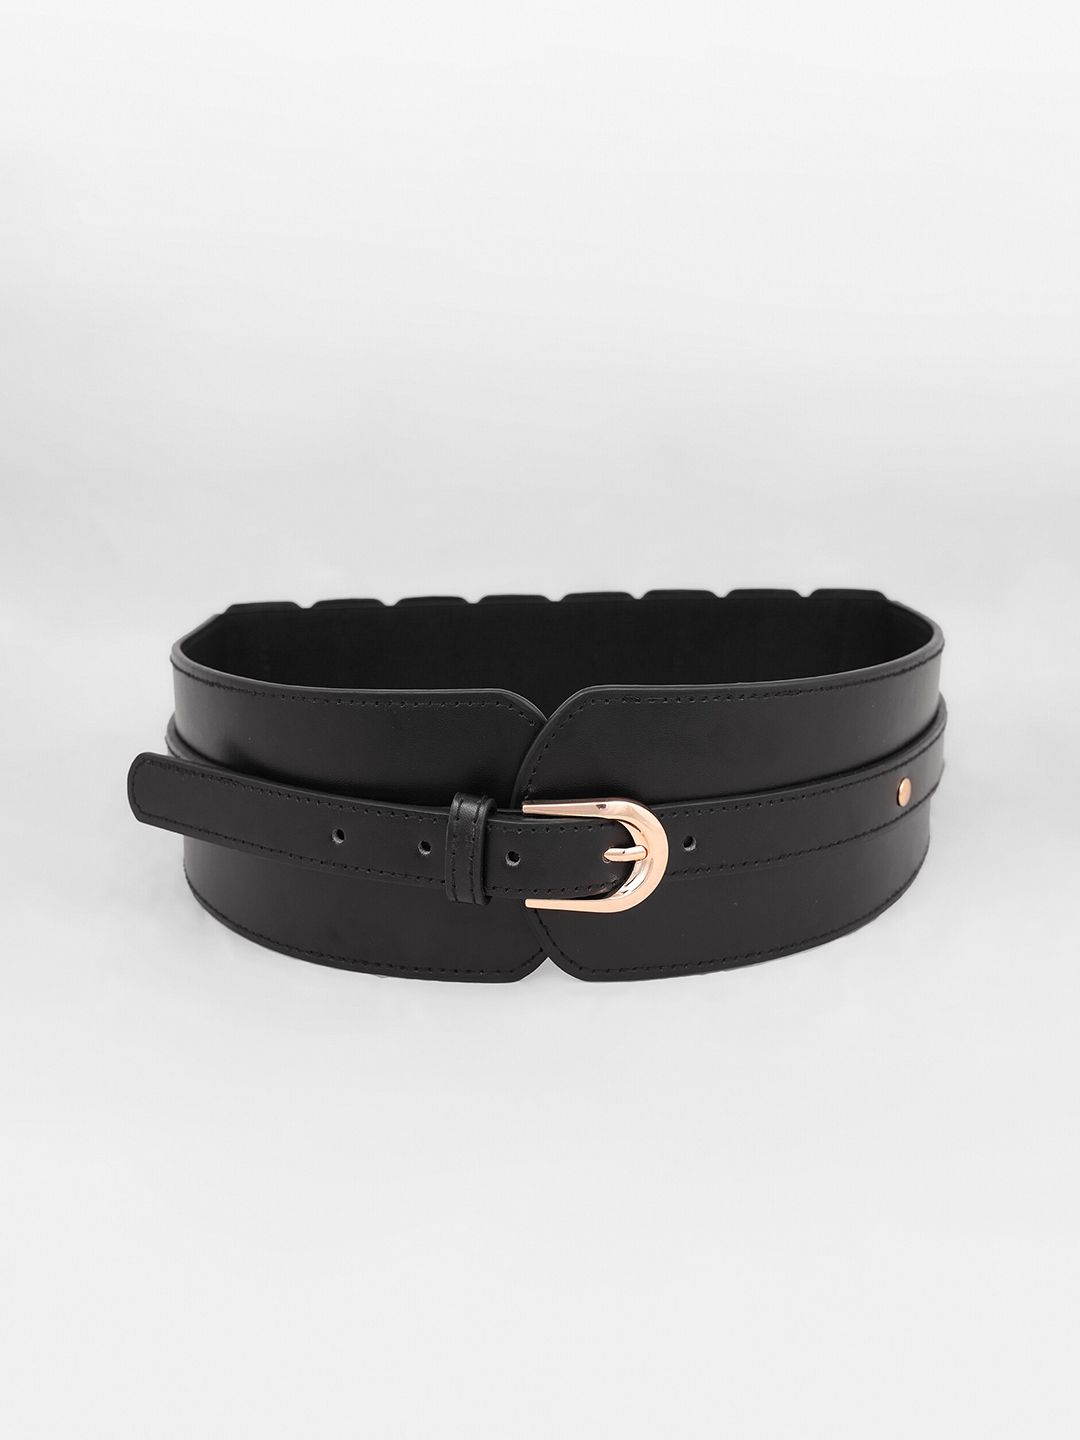 CRUSSET Women Black Stretchable Belt Price in India